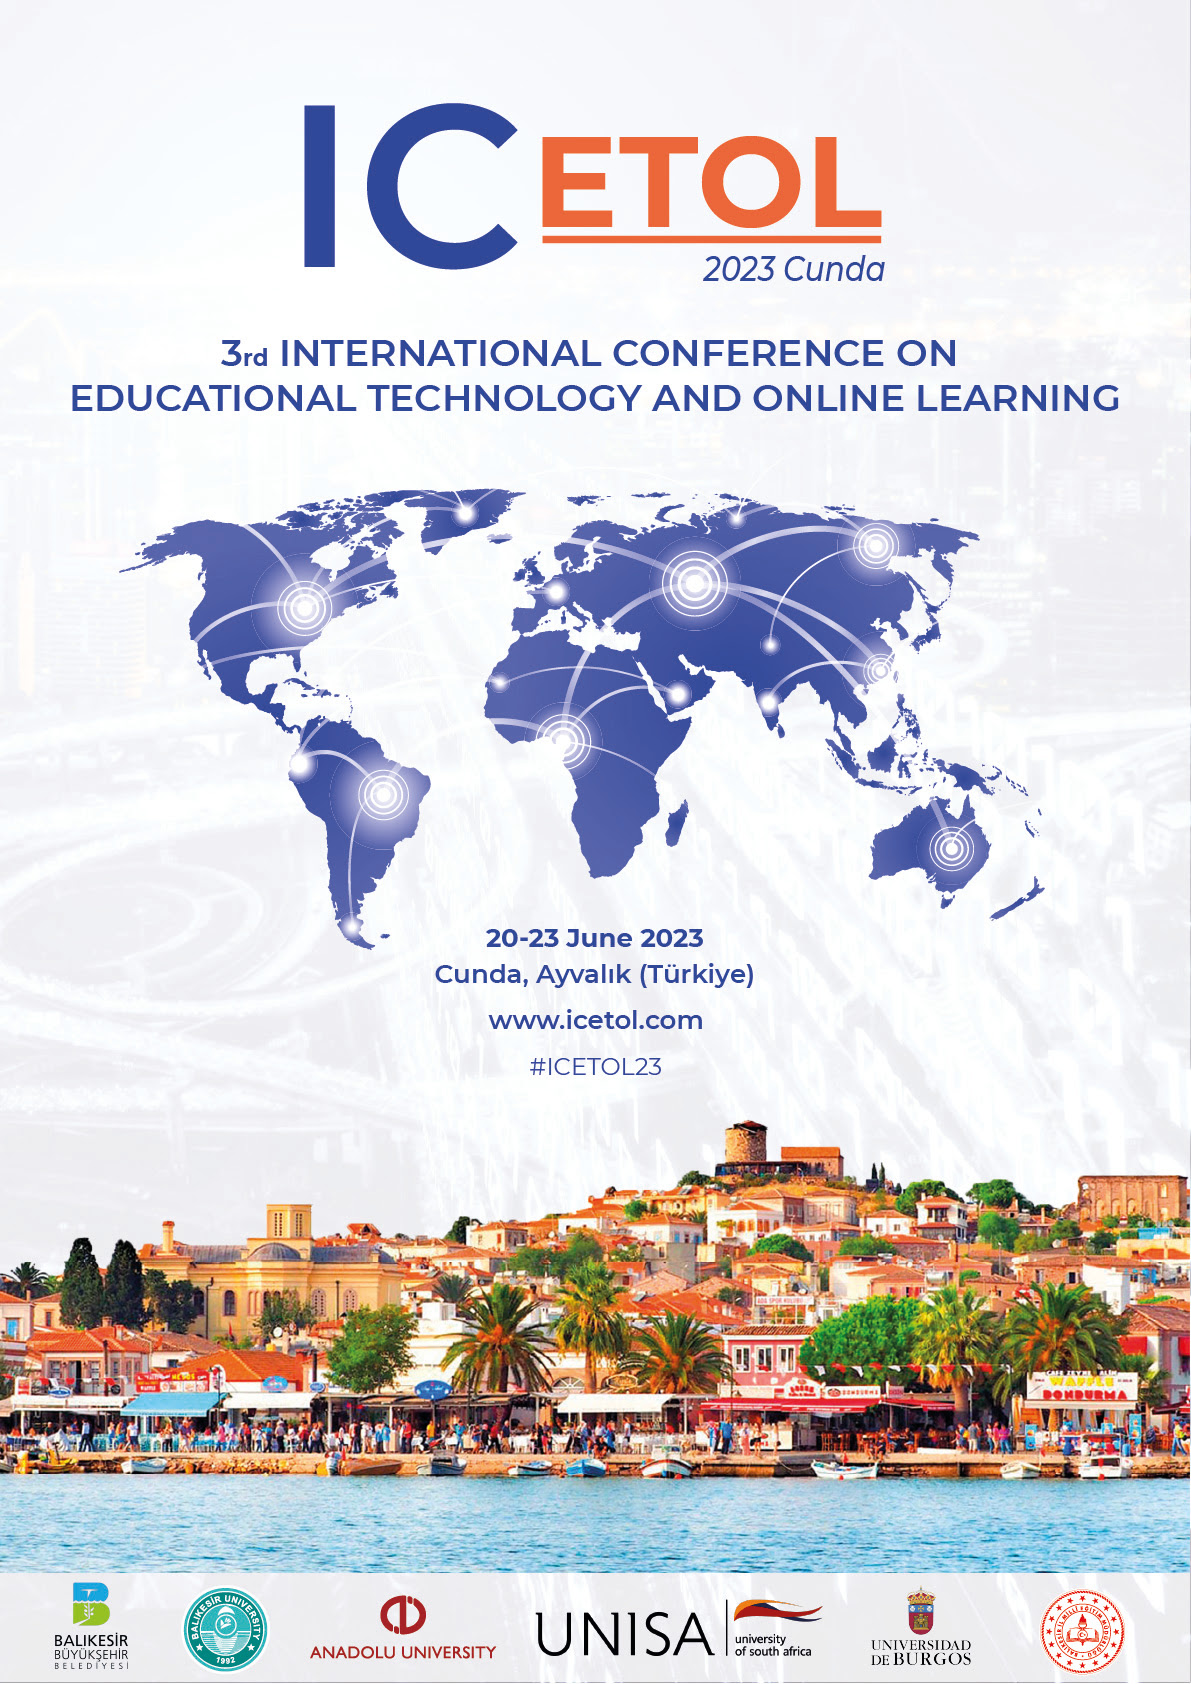 ICETOL: International Conference on Educational Technology and Online Learning